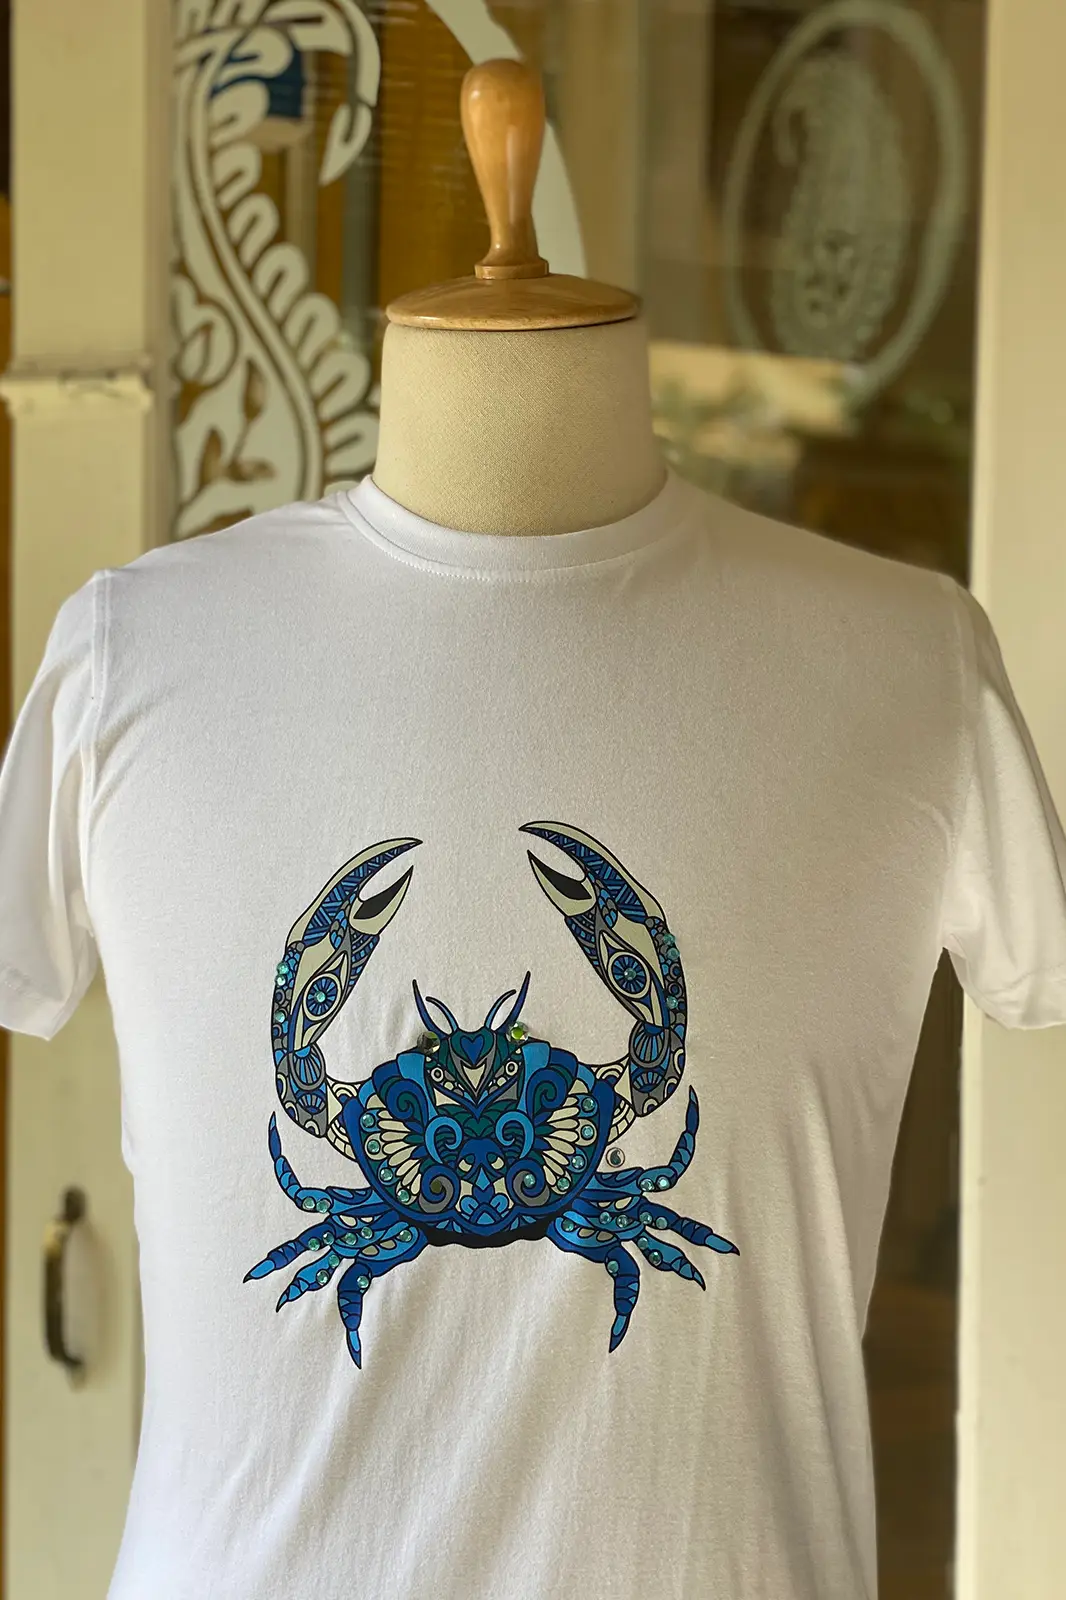 Joa Zod Can White, t shirt for man, t shirt for men, t shirt with design, white t shirt, Crab design, white t shirt male, zodiac sign tshirt, crab t shirt